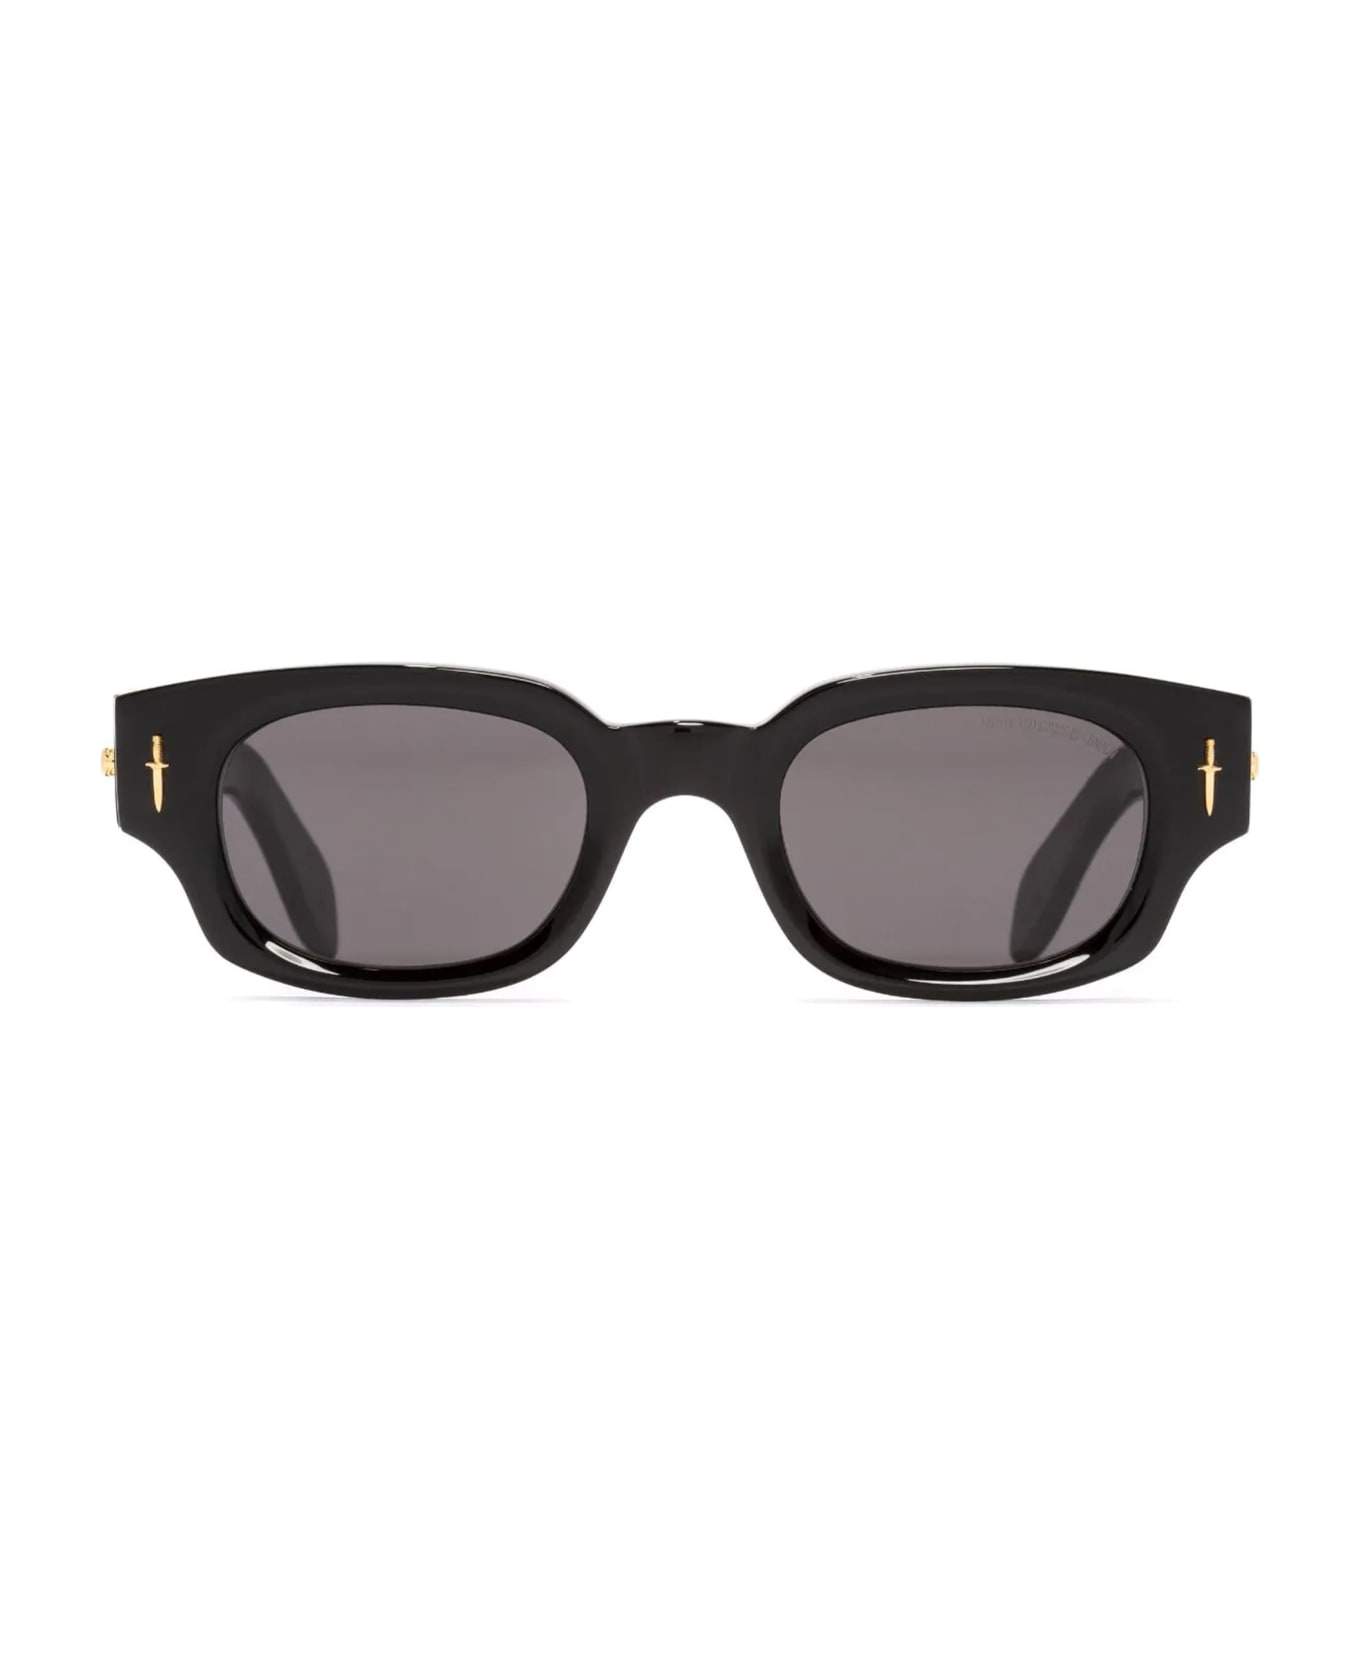 Cutler and Gross The Great Frog - Soaring Eagle - Black / Gold Sunglasses - Black